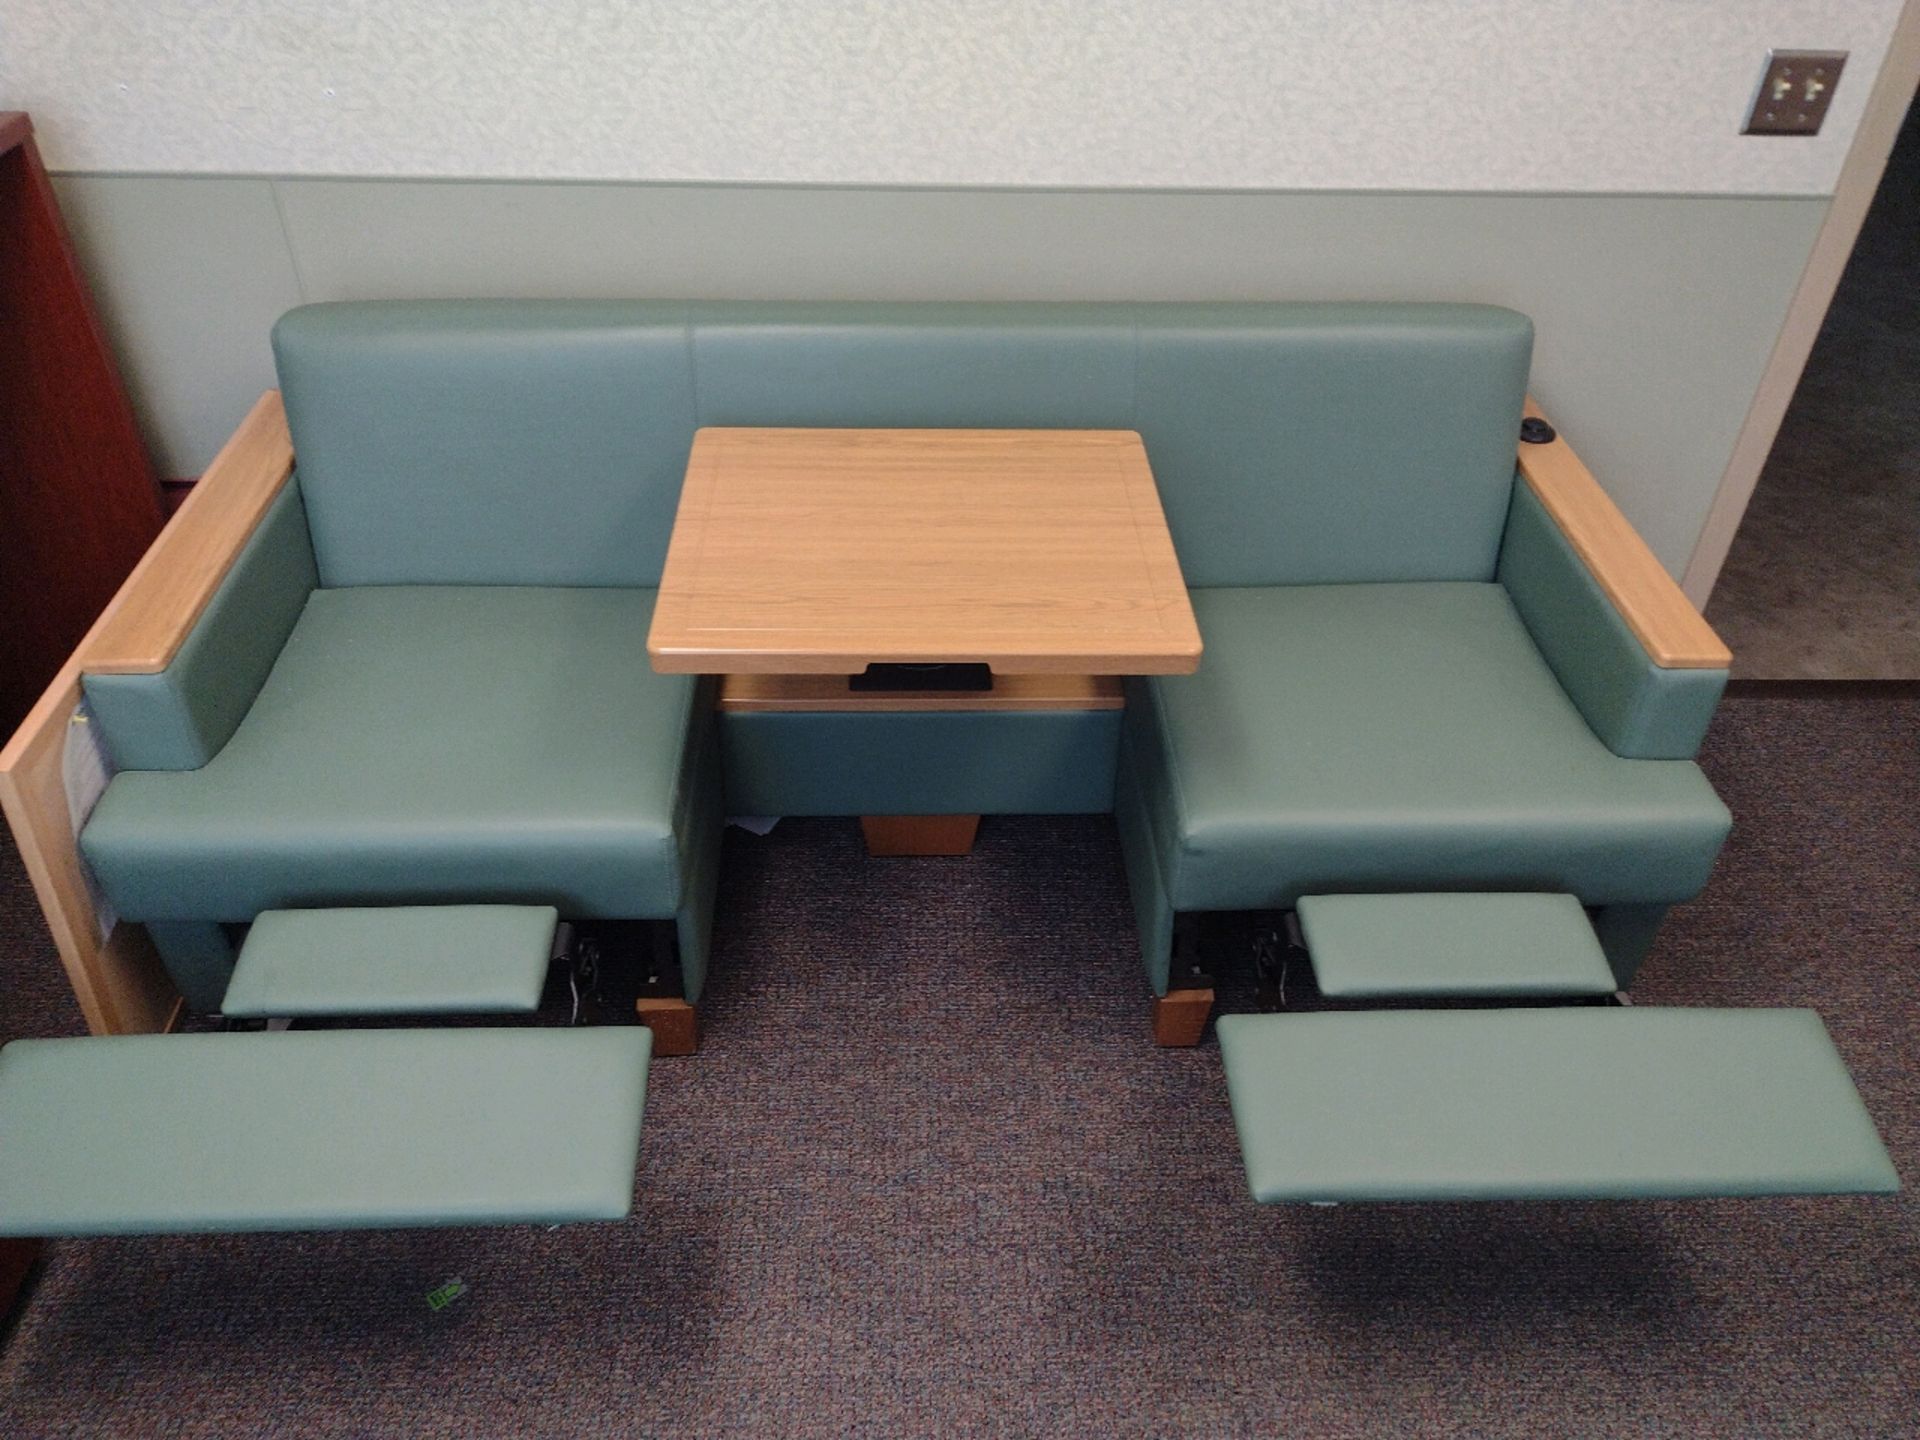 OFFICE TO INCLUDE: 2- DESKS AND SLEEPER SOFA/CHAIR WITH INTEGRATED TABLE - Image 4 of 4